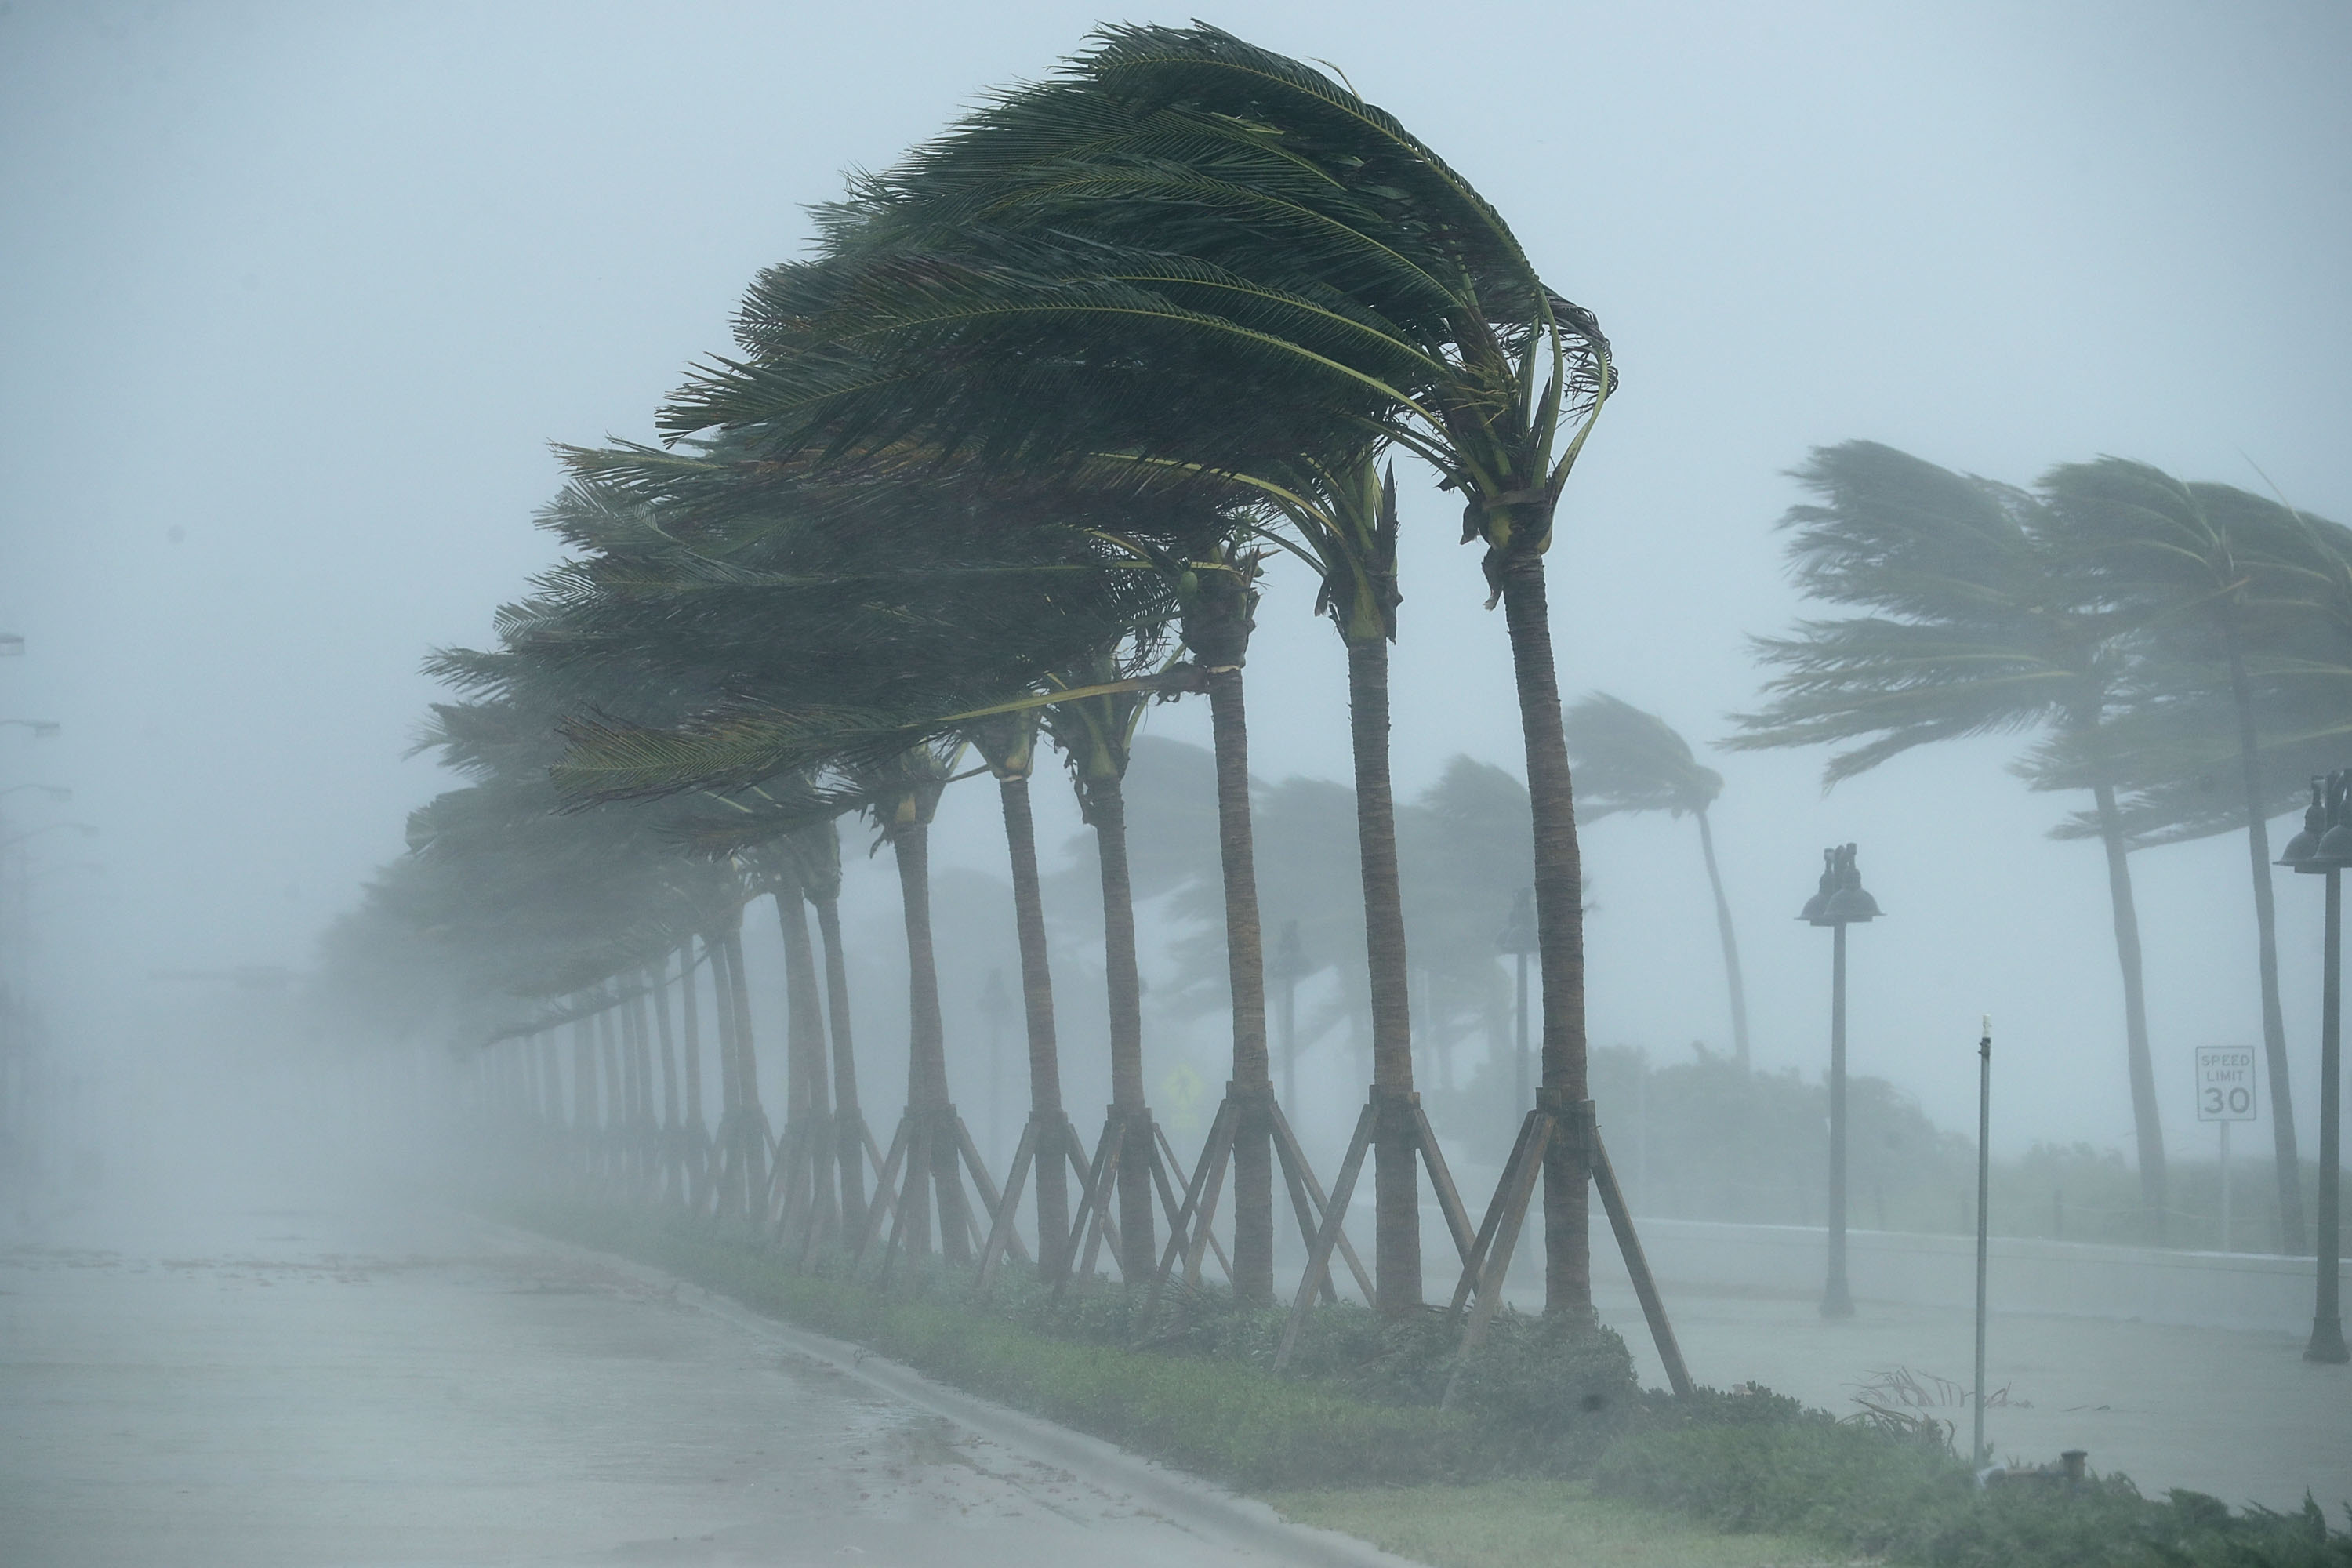 Trees bend in the tropical storm wind along North Fort Lauderdale Beach Boulevard as Category 3 Hurricane Irma hits the southern part of the state September 10, 2017 in Fort Lauderdale, Florida. (Chip Somodevilla&mdash;Getty Images)